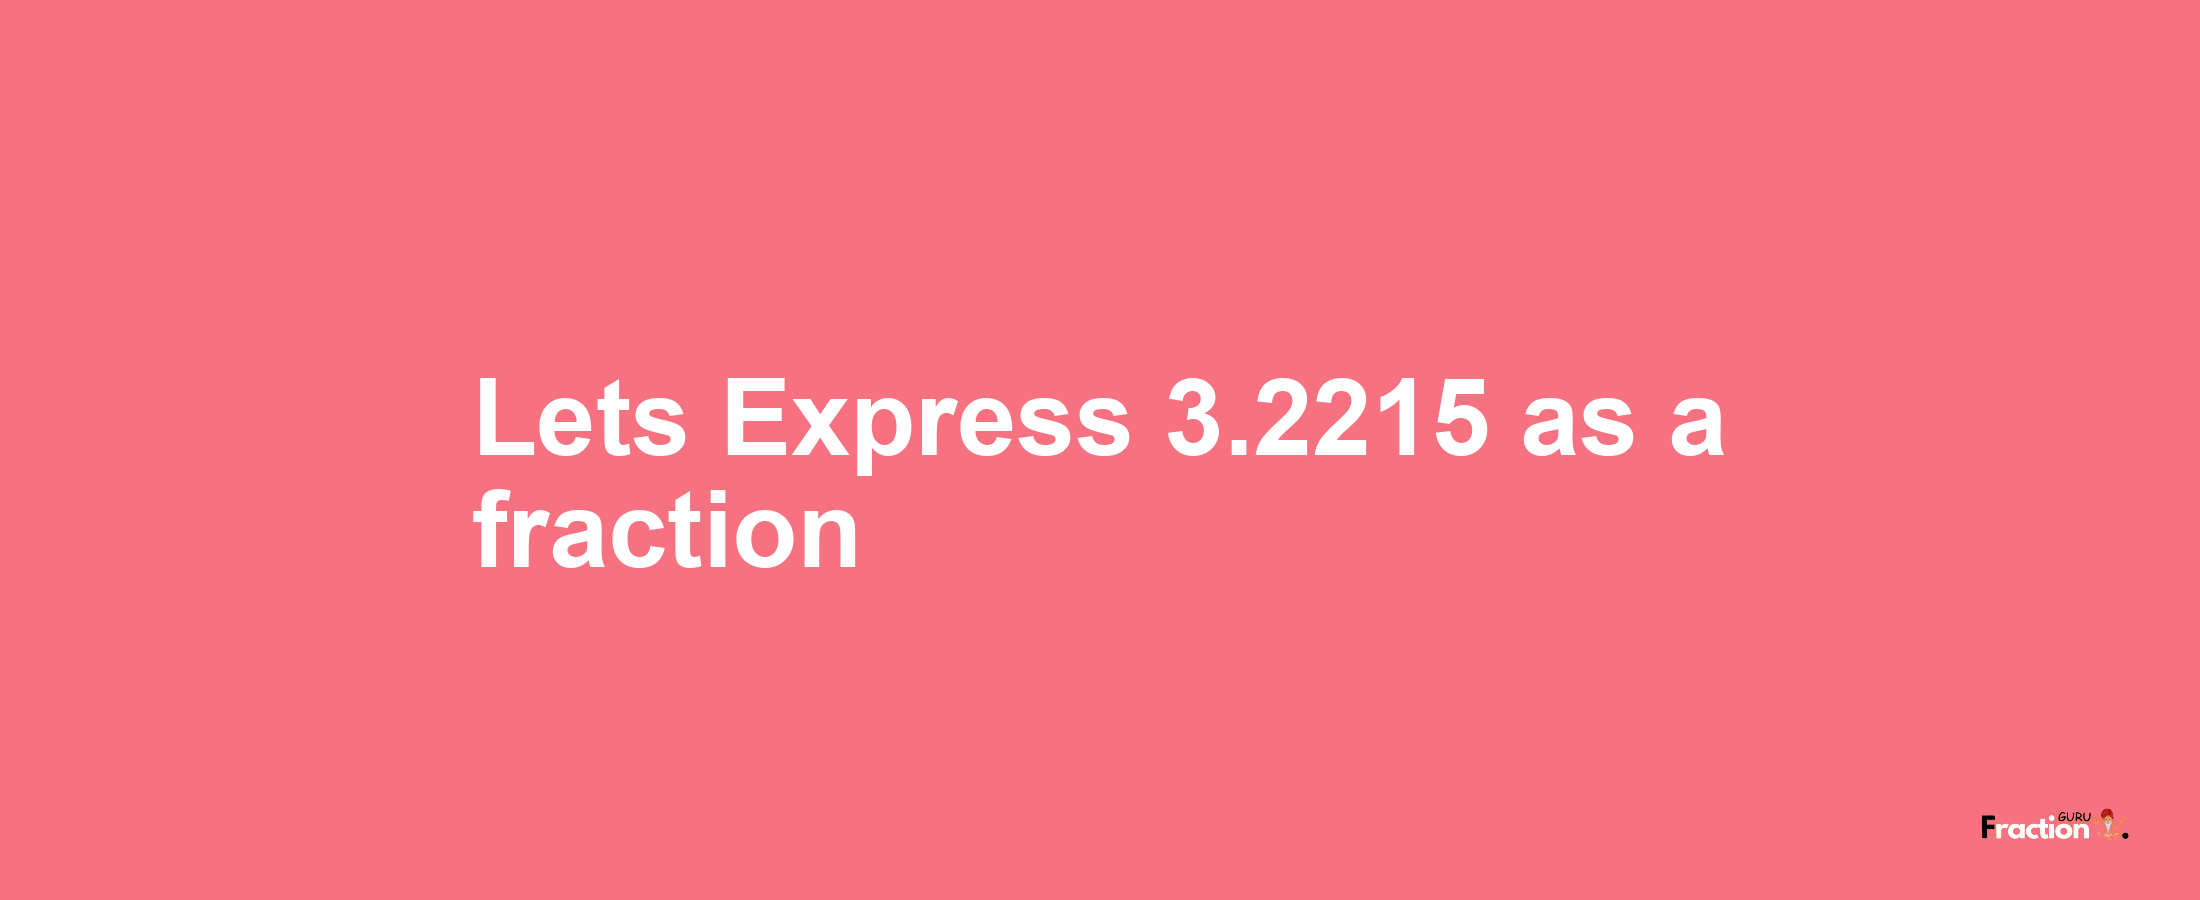 Lets Express 3.2215 as afraction